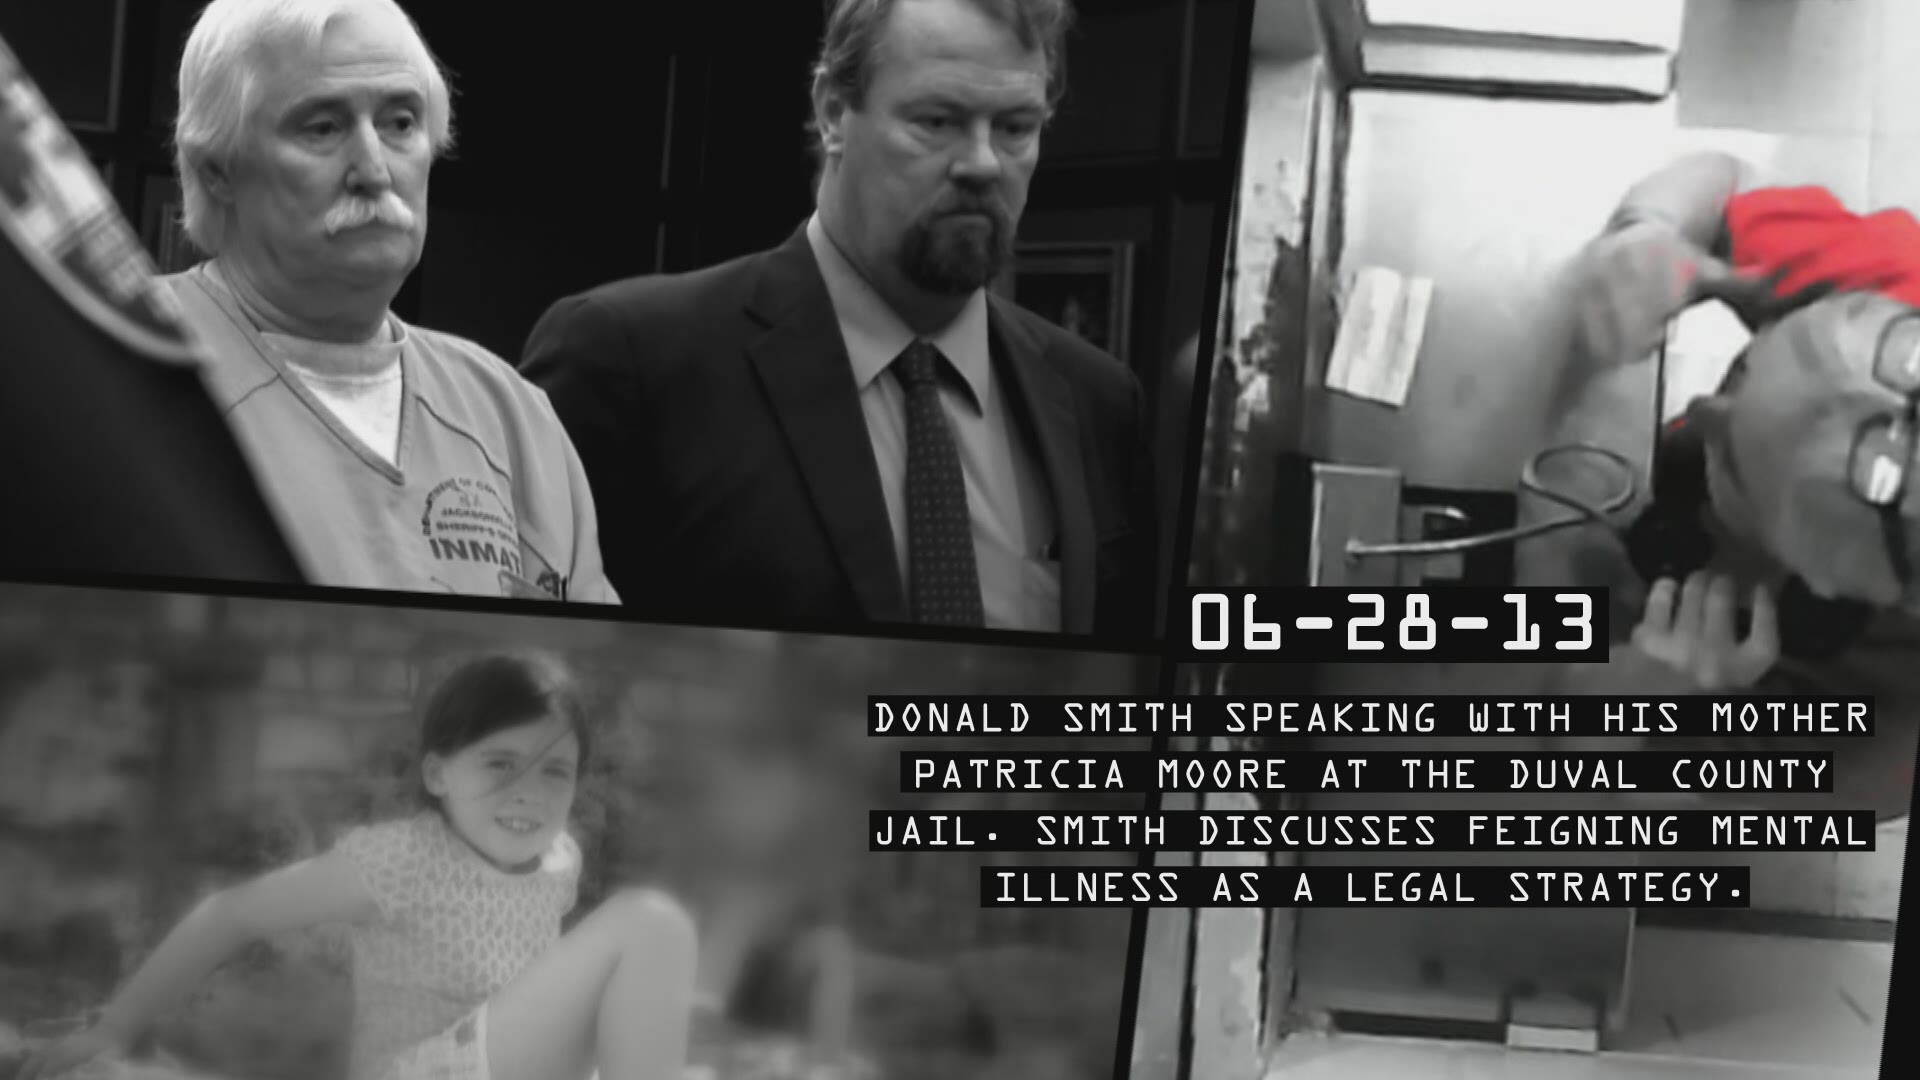 ***WARNING: The content and language within the videos are graphic and can be disturbing.*** Secret jail recording of a conversation between Donald Smith and his mother, Patricia Moore on July 19, 2013. Smith asks his mom to buy him a copy of the “DSM IV” – a guide to mental disorders -- so he knows how to act mentally ill.